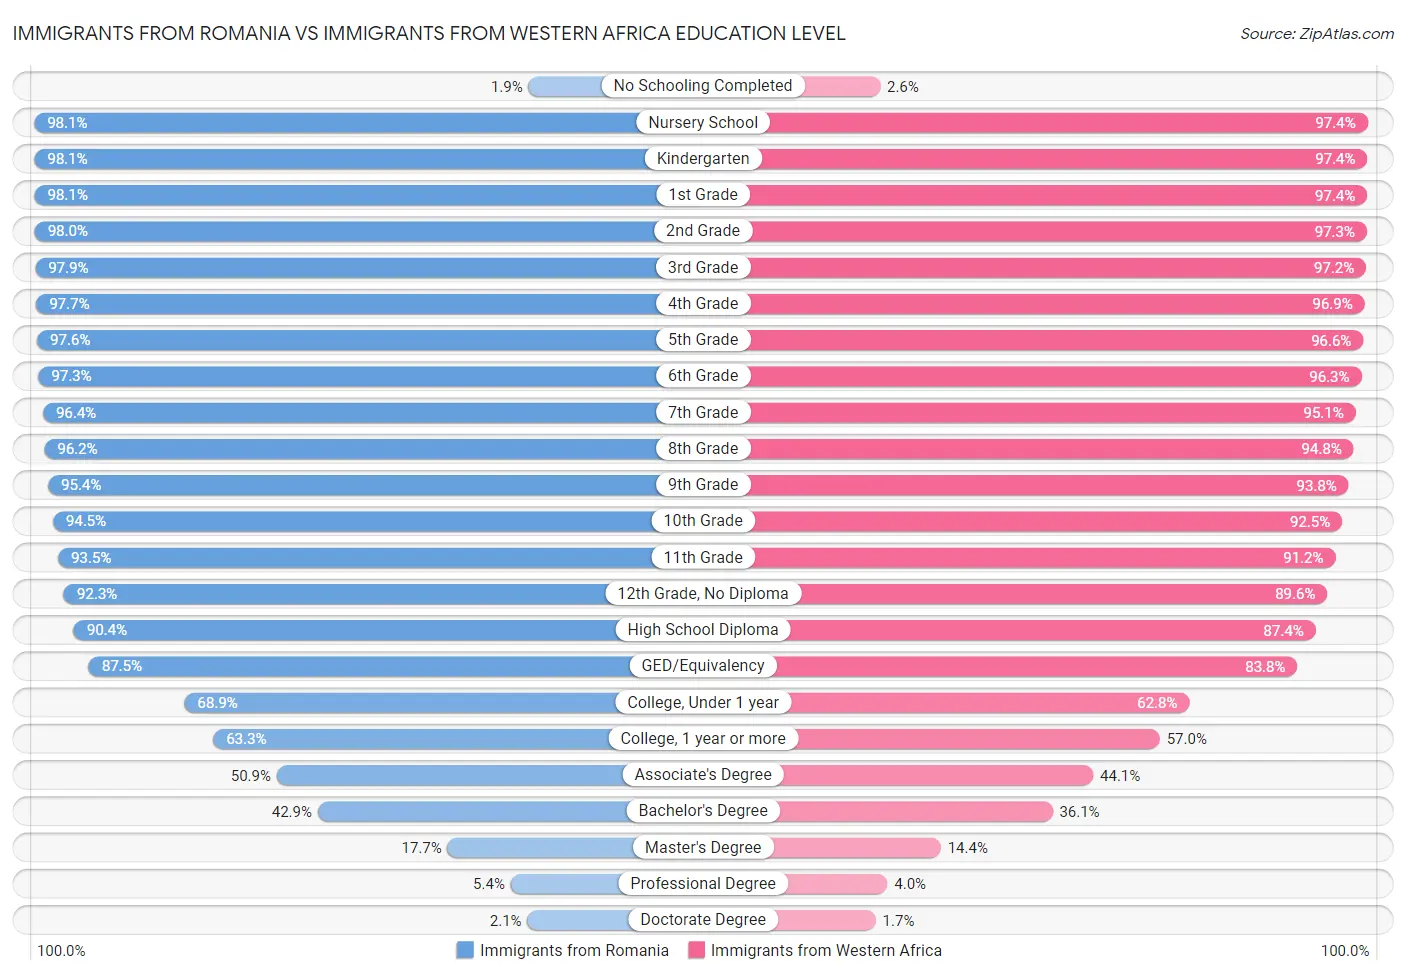 Immigrants from Romania vs Immigrants from Western Africa Education Level